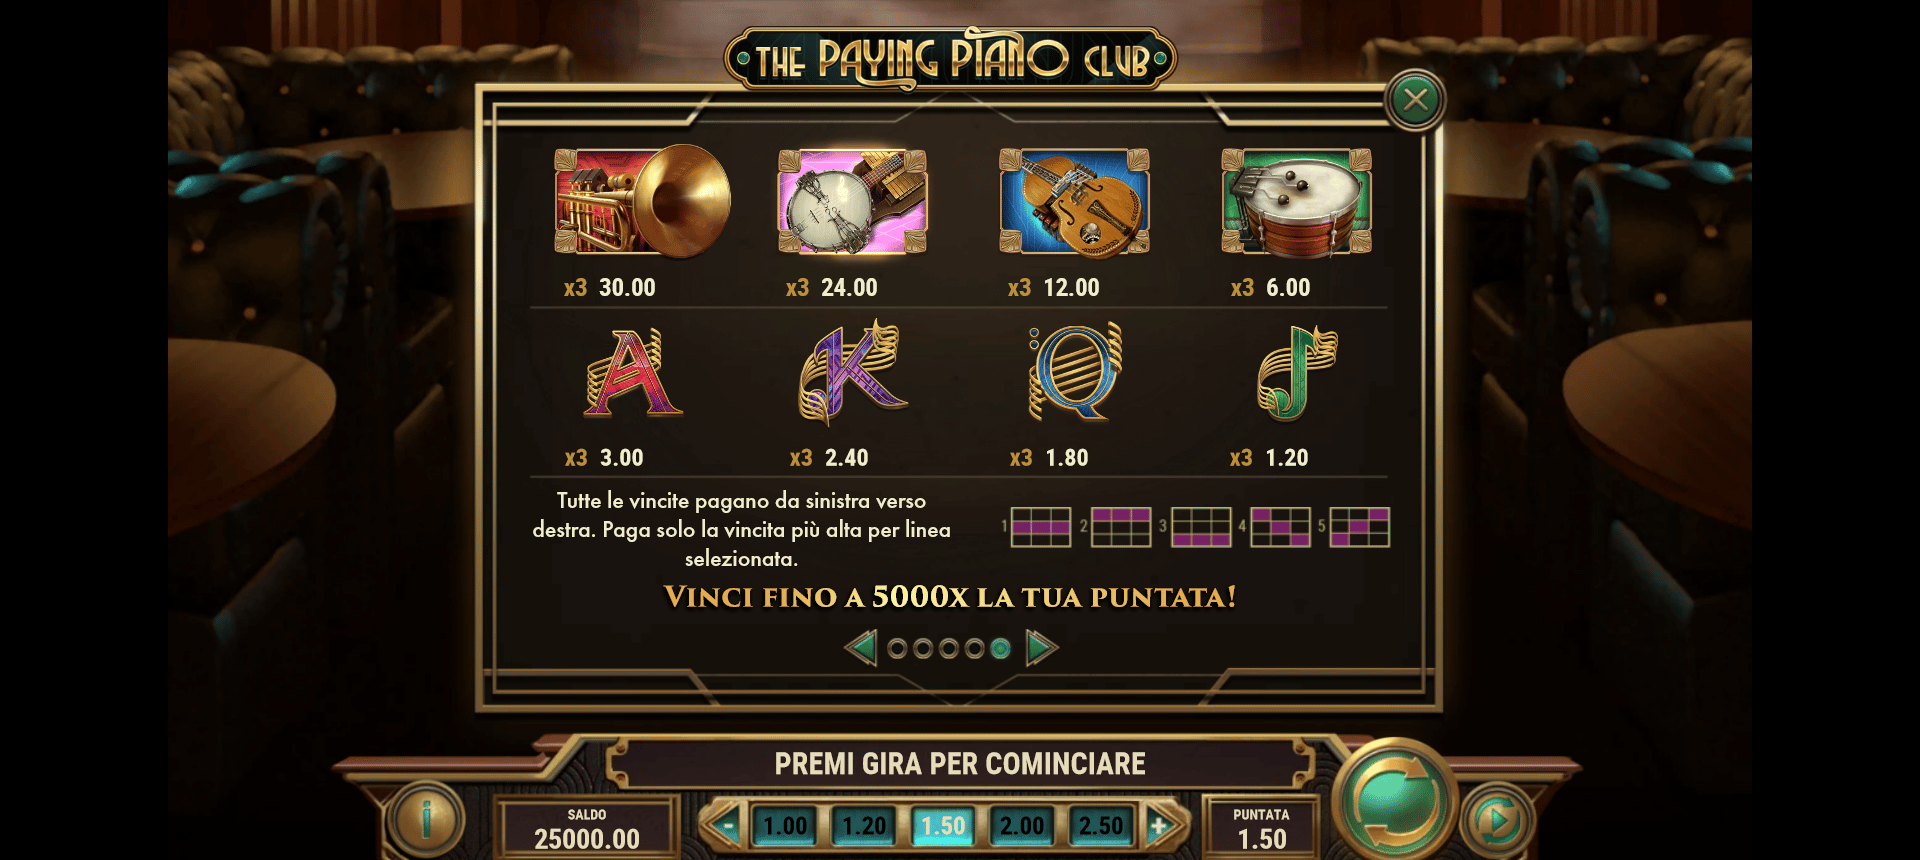 paytable della slot online the paying piano club